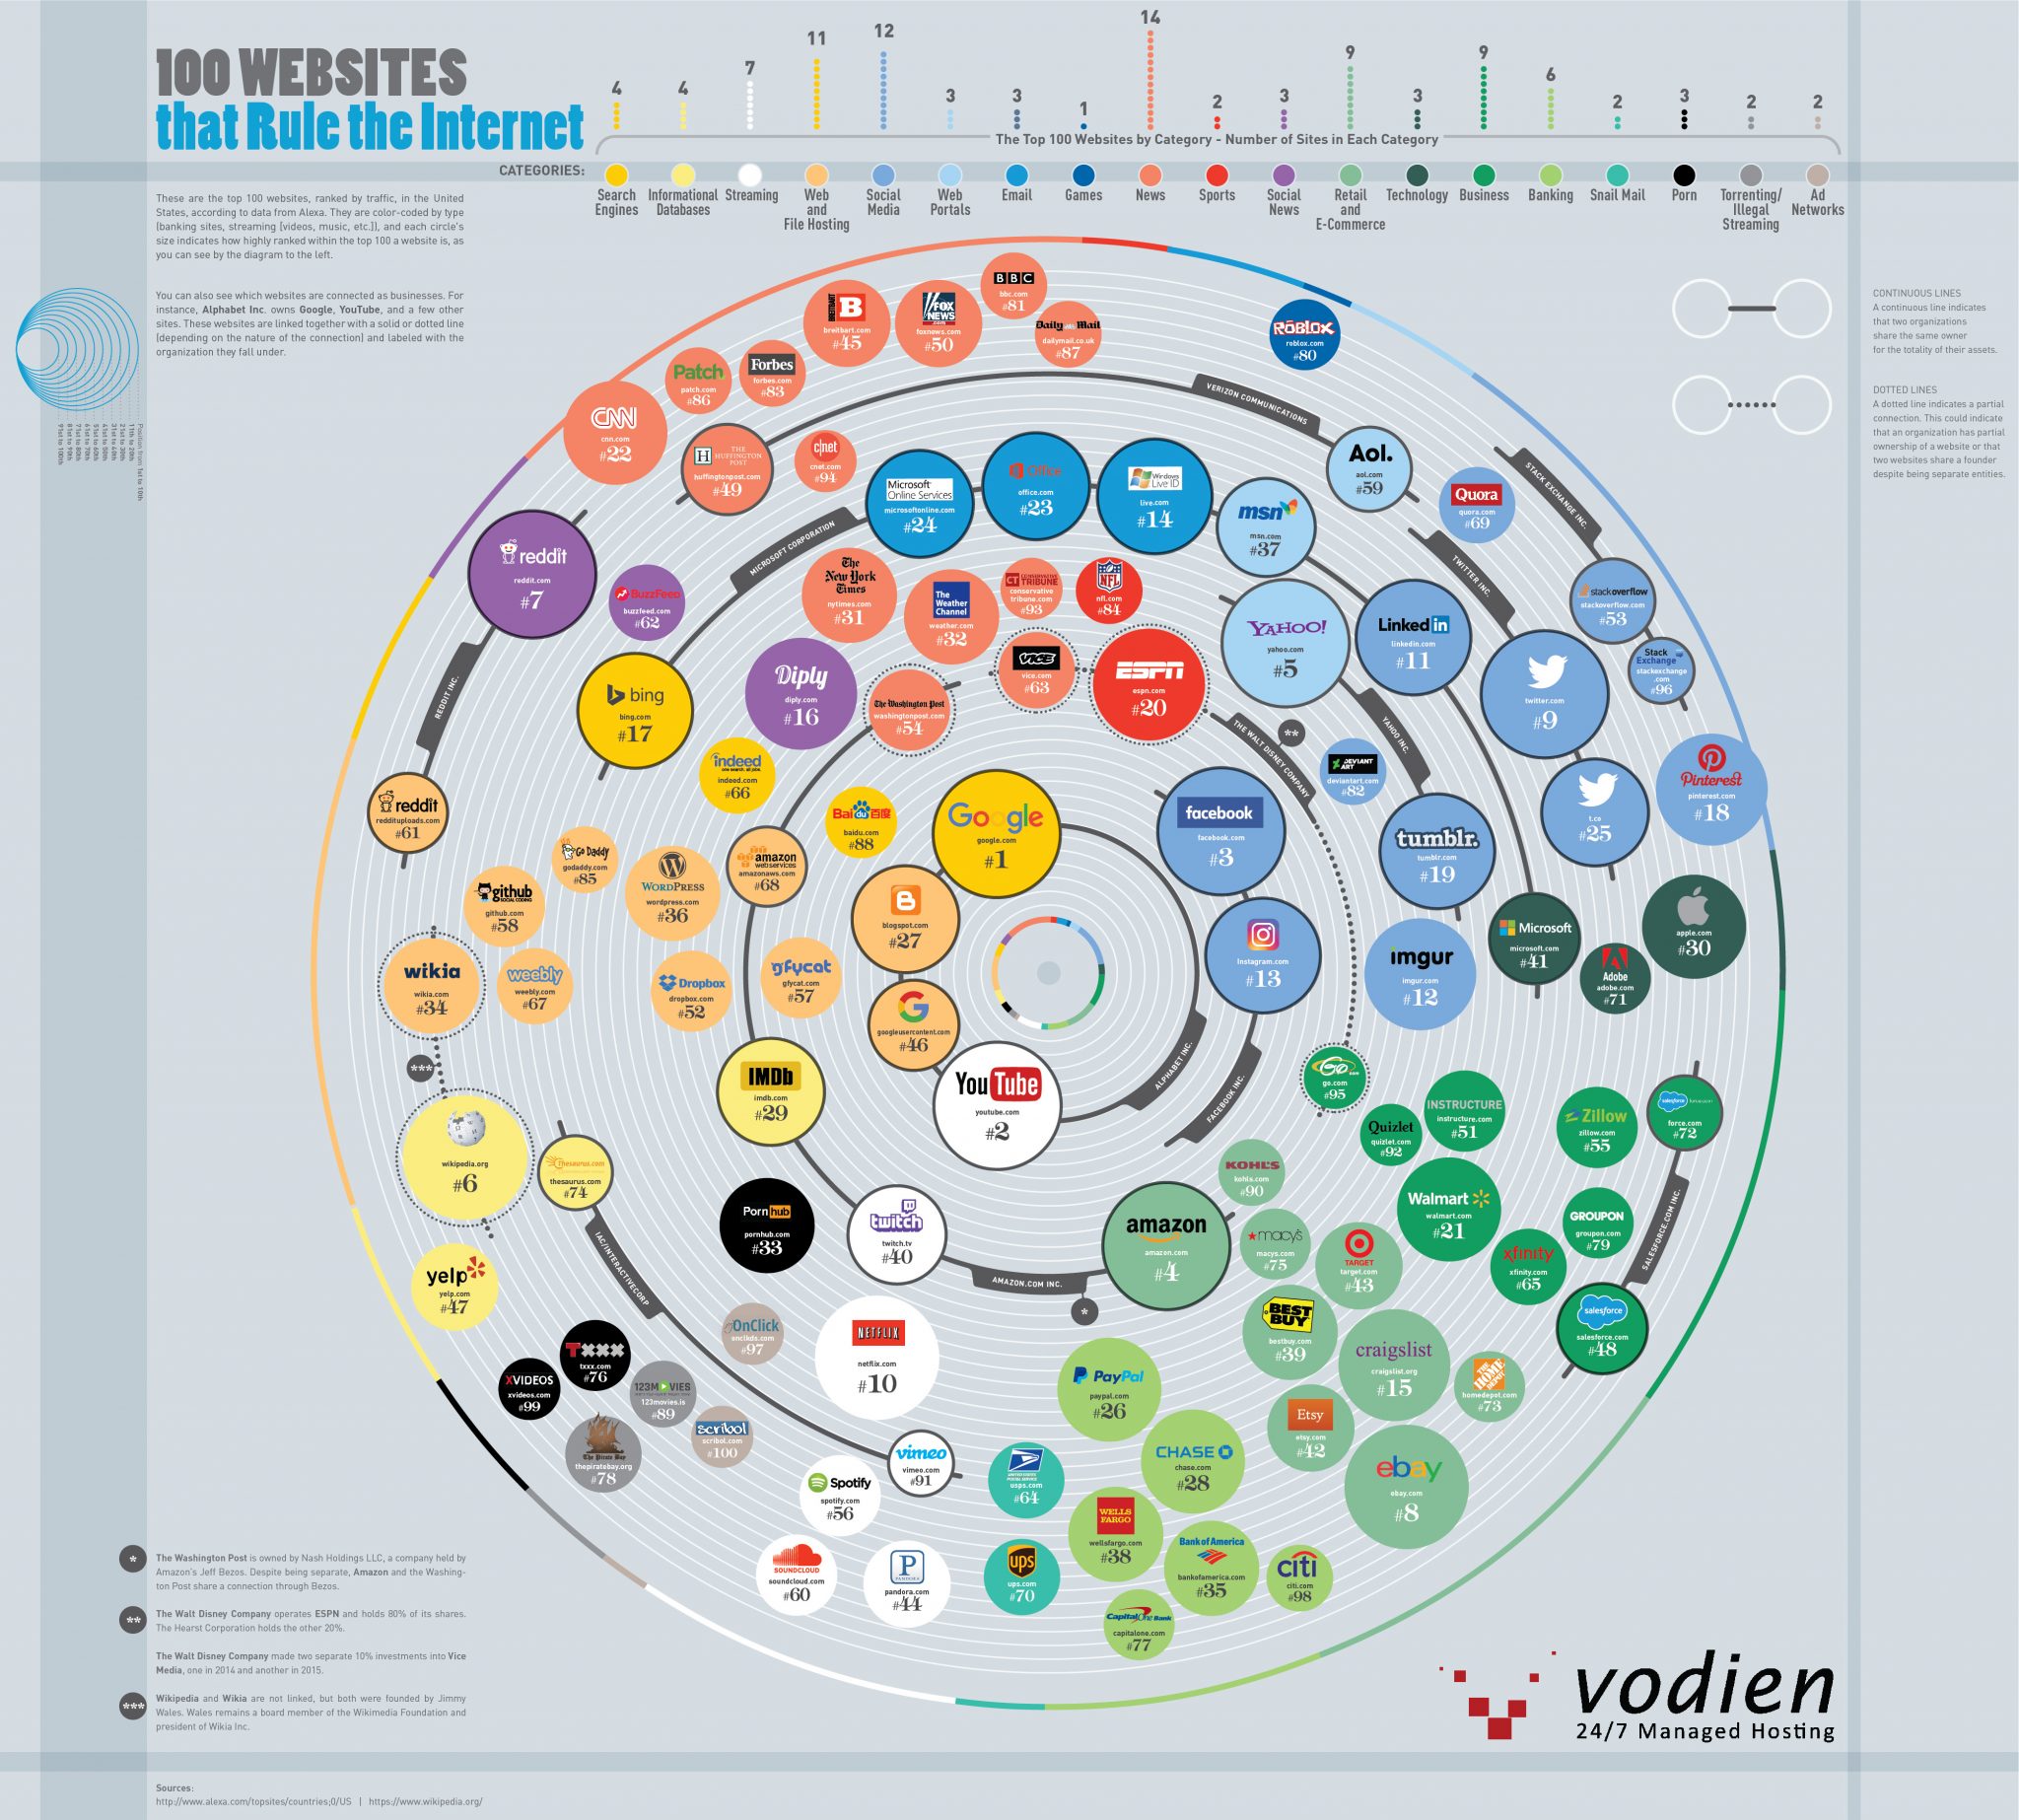 Infographic shows the 100 top websites based on monthly traffic